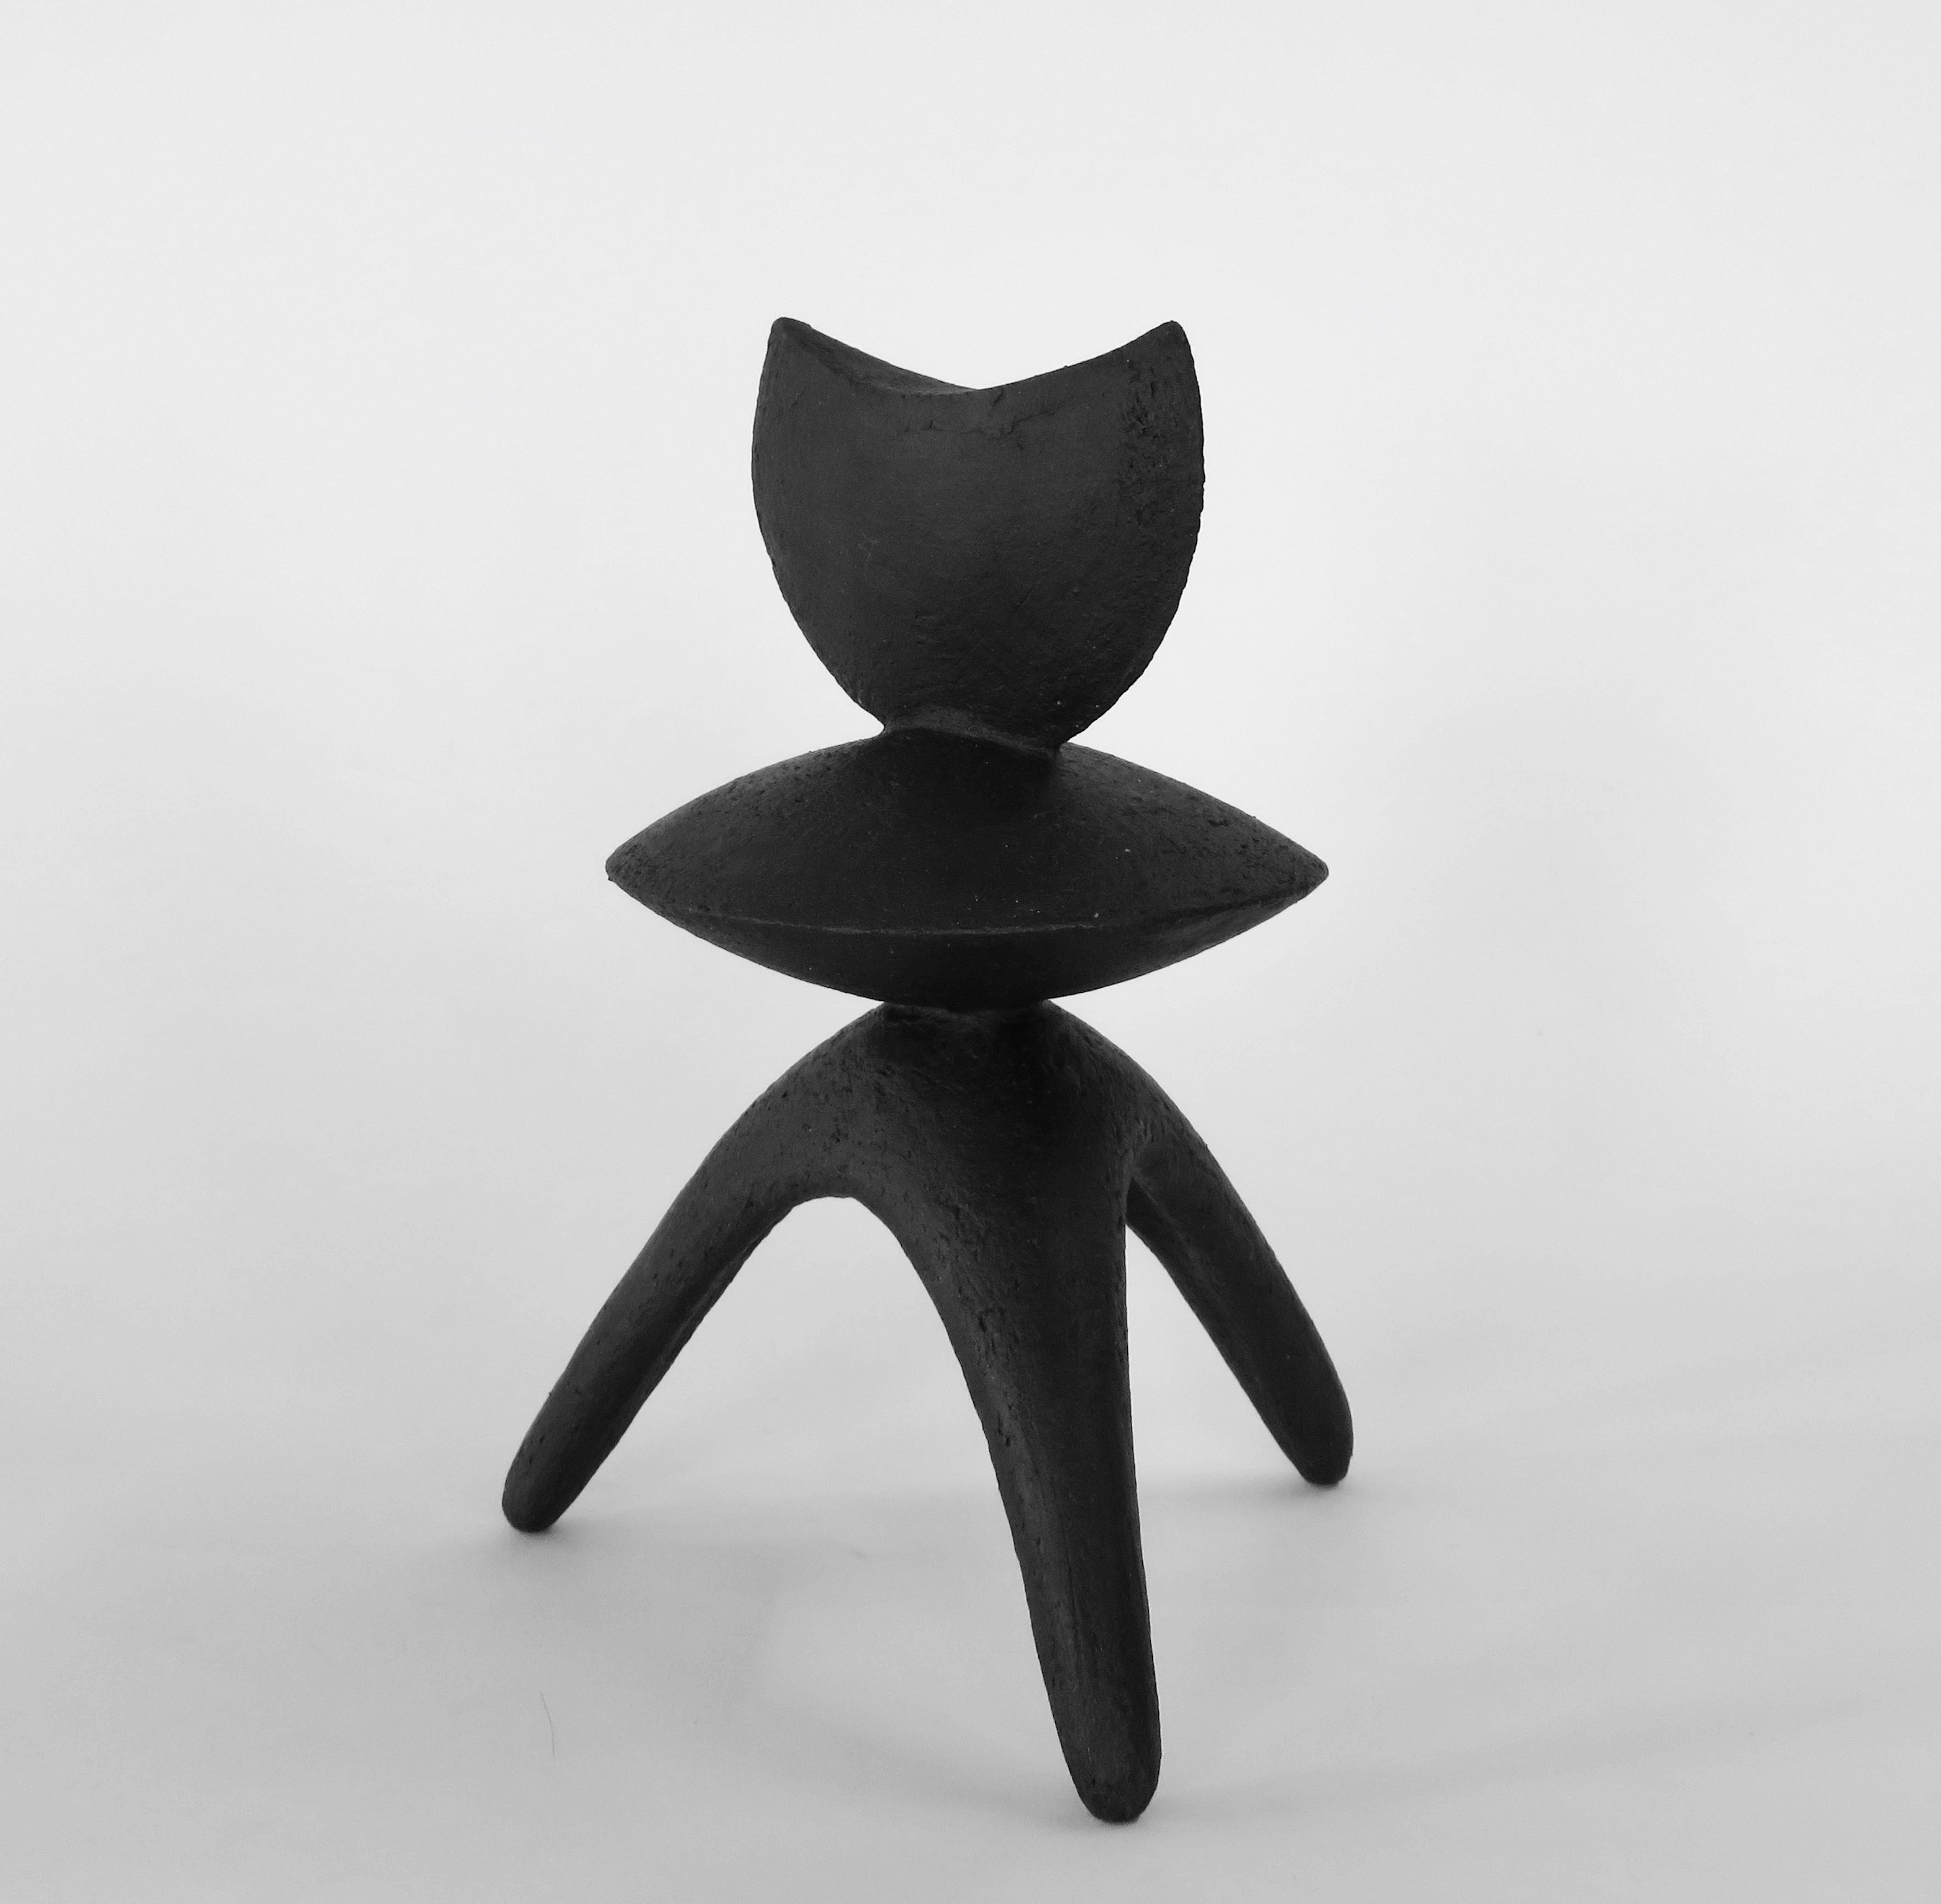 One of a trio of fully hand built ceramic TOTEMS in matte black under glazed stoneware. This one, 